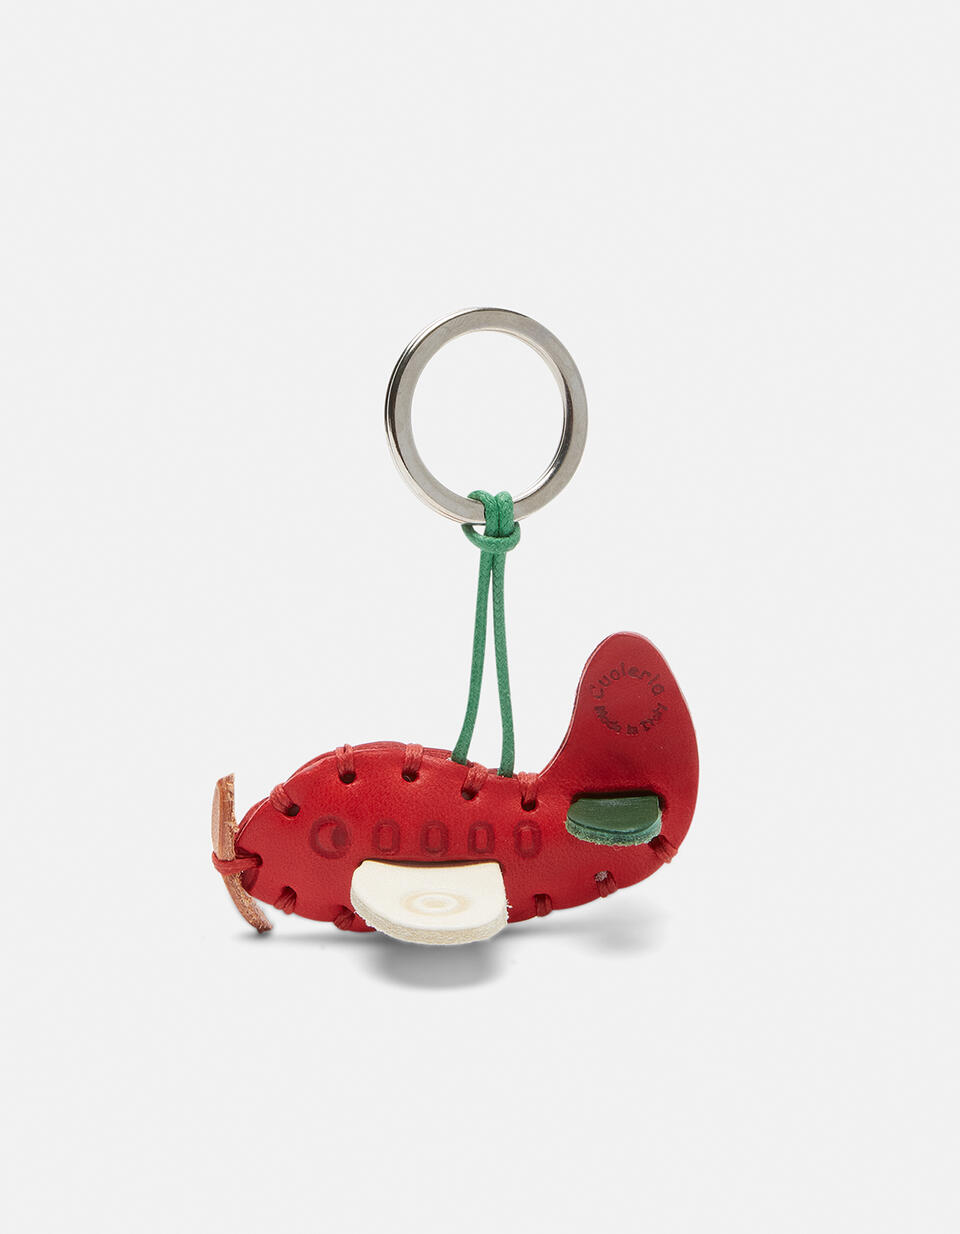 Keyring ROSSO  - Key Holders - Women's Accessories - Accessories - Cuoieria Fiorentina